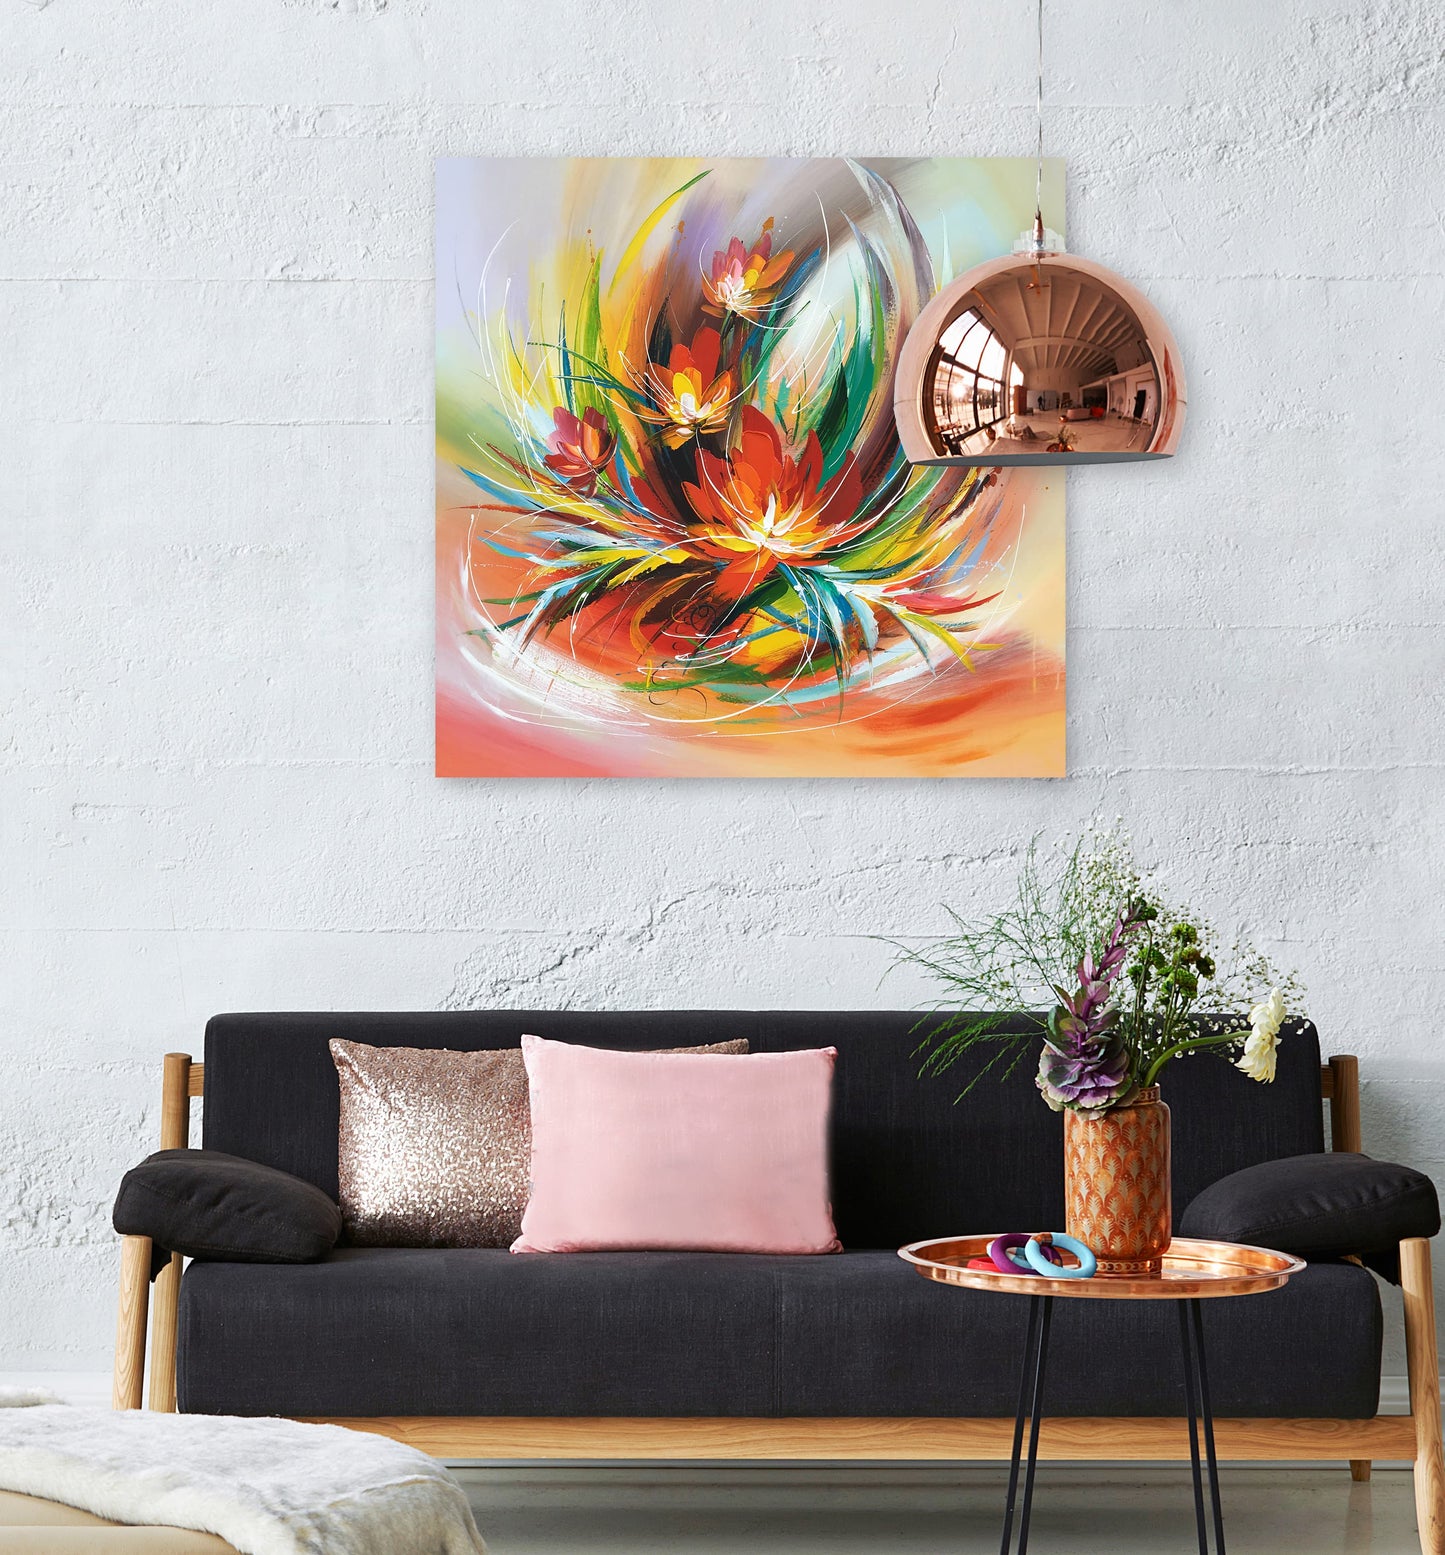 Hand-painted Art "Abstract Flowers" painting on canvas original, Canvas Wall Art for living room, bedroom, bar - Wrapped Canvas Painting